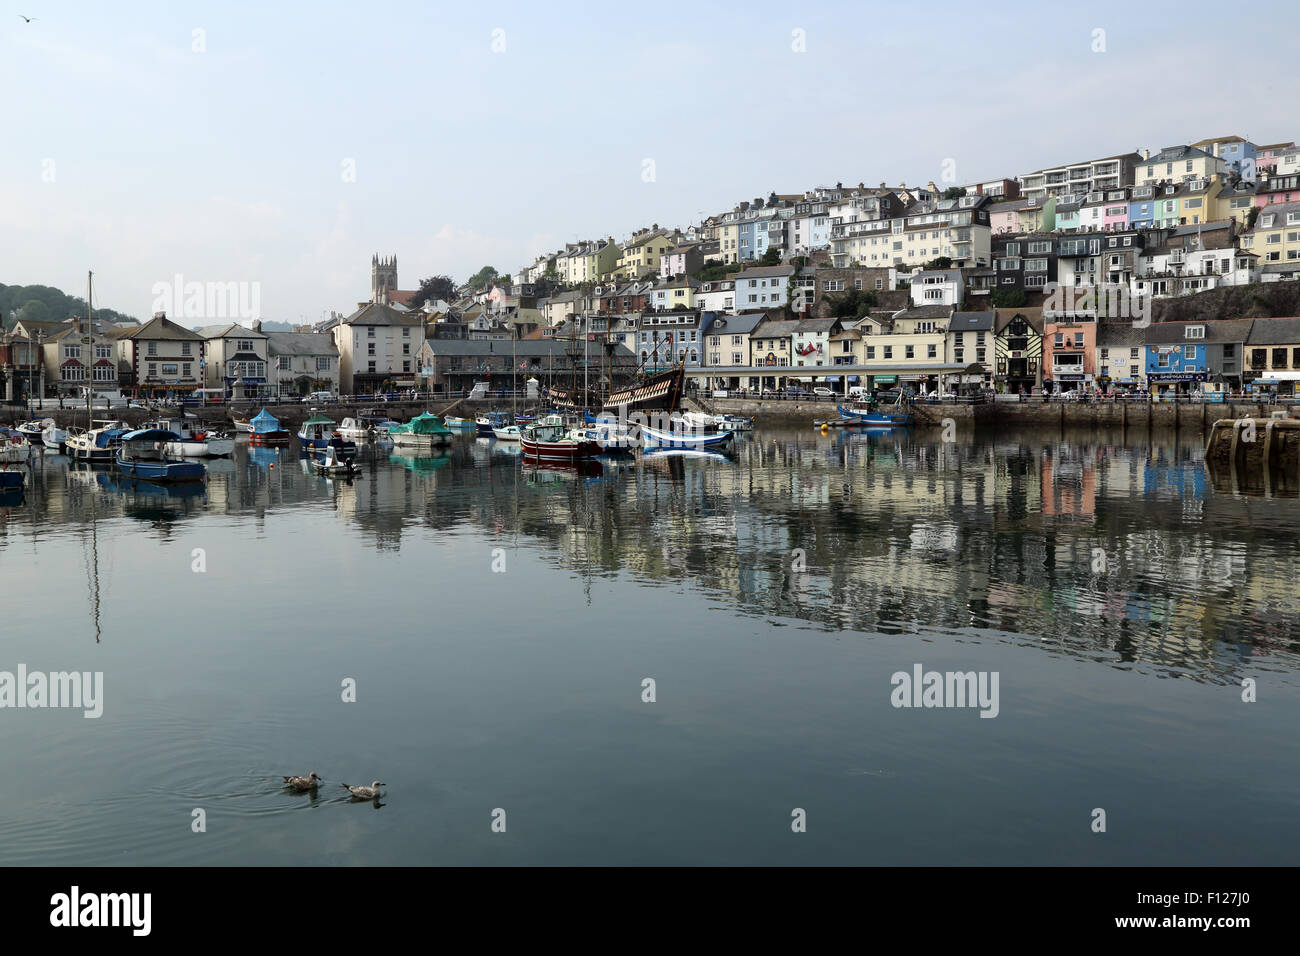 View of the harbour at Brixham, Devon, England, UK. Boats can be seen on the water, and houses, shops and restaurants behind. Stock Photo